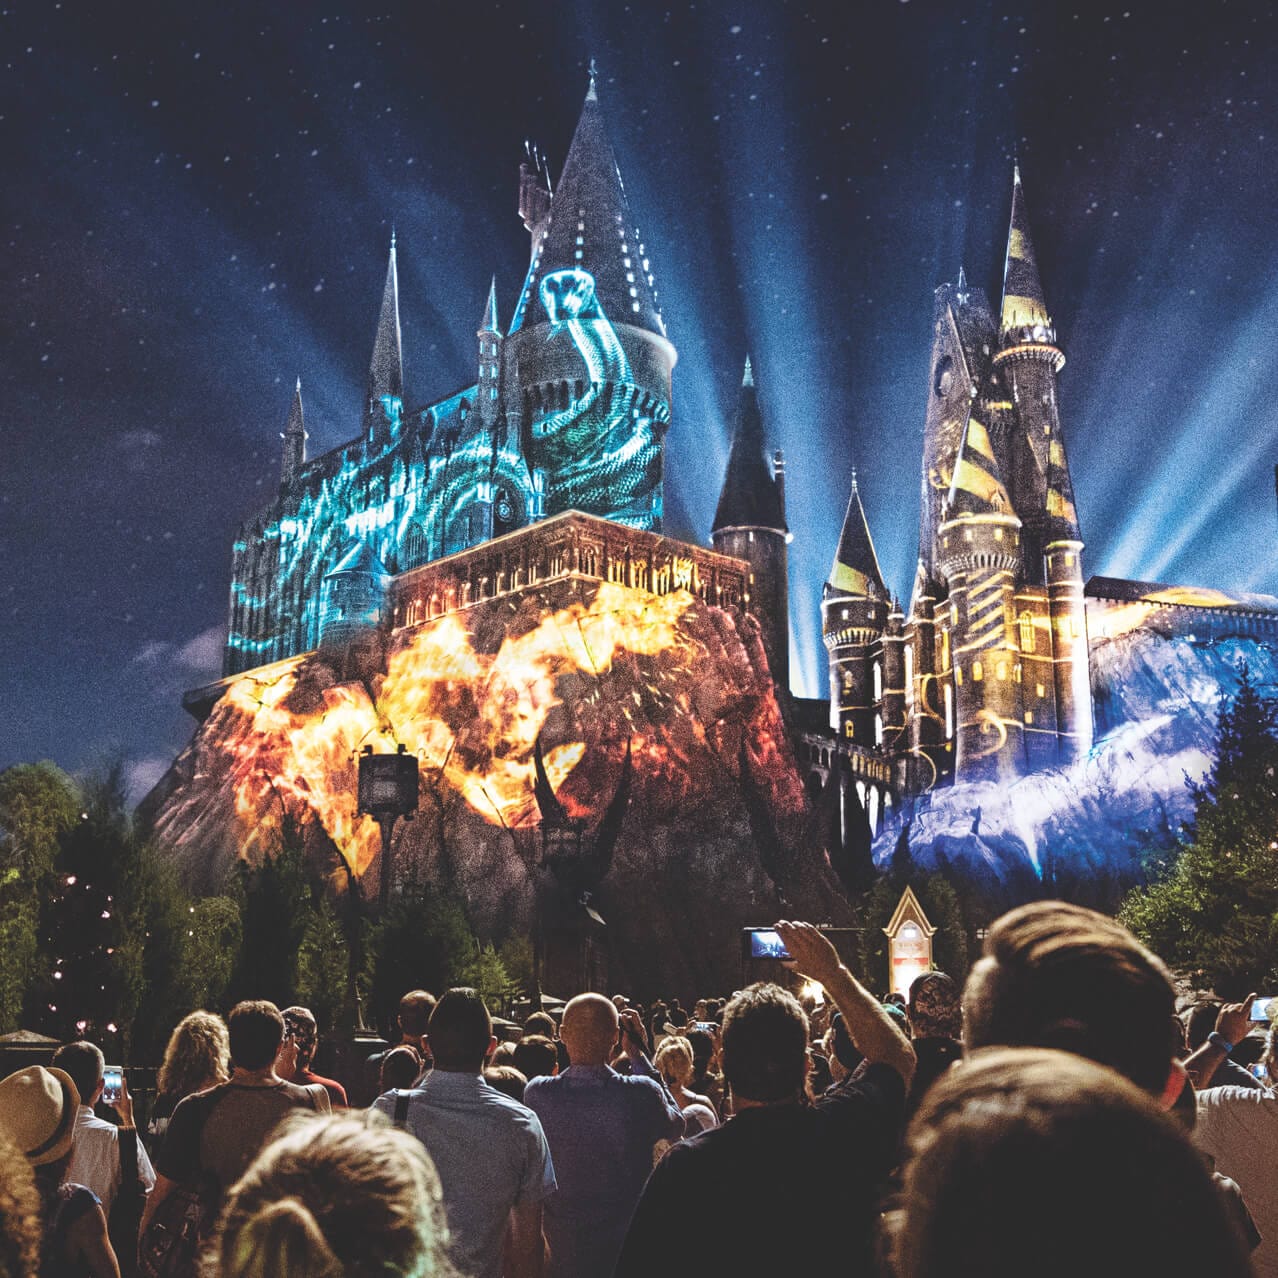 The Nighttime Lights At Hogwarts™ Castle | Universal's Islands of Adventure™